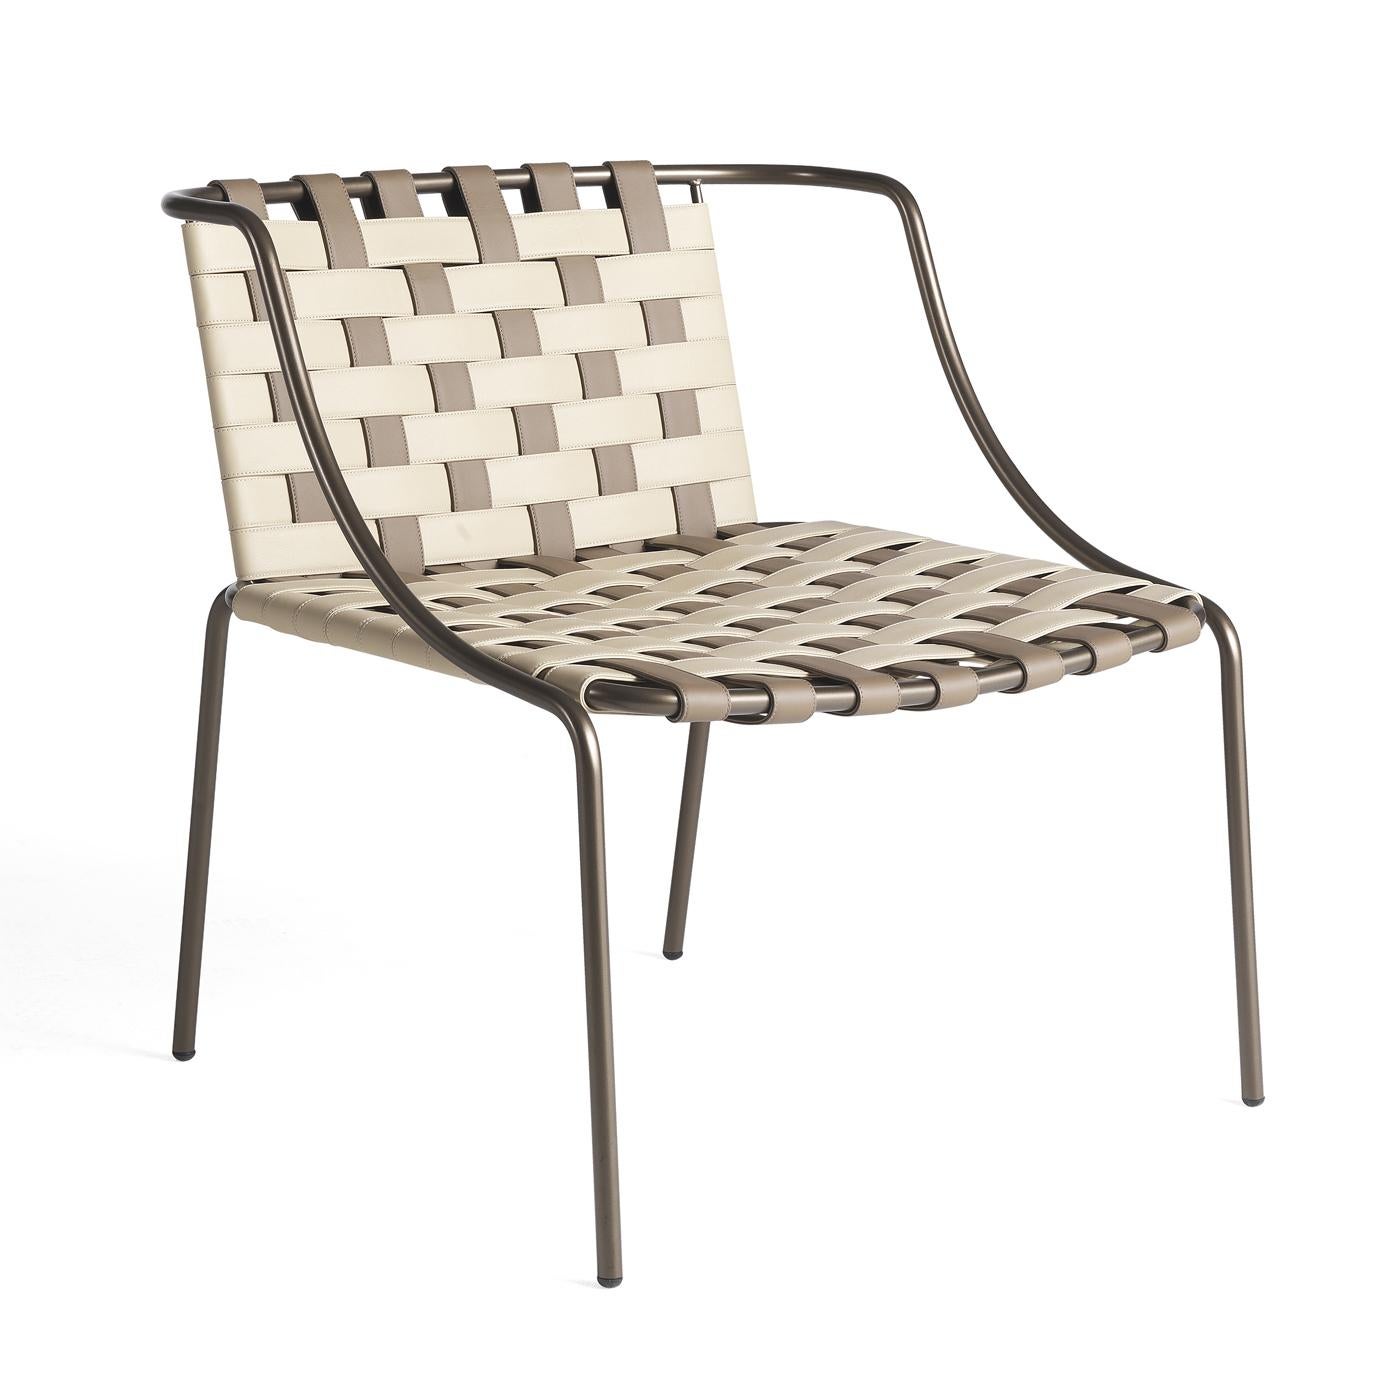 Combining Classic design with modern sophistication, this small armchair features a stunning white and beige leather interweaving on the seat and backrest resting on a sinuous and slim structure made of tubular metal. This piece will be a unique,